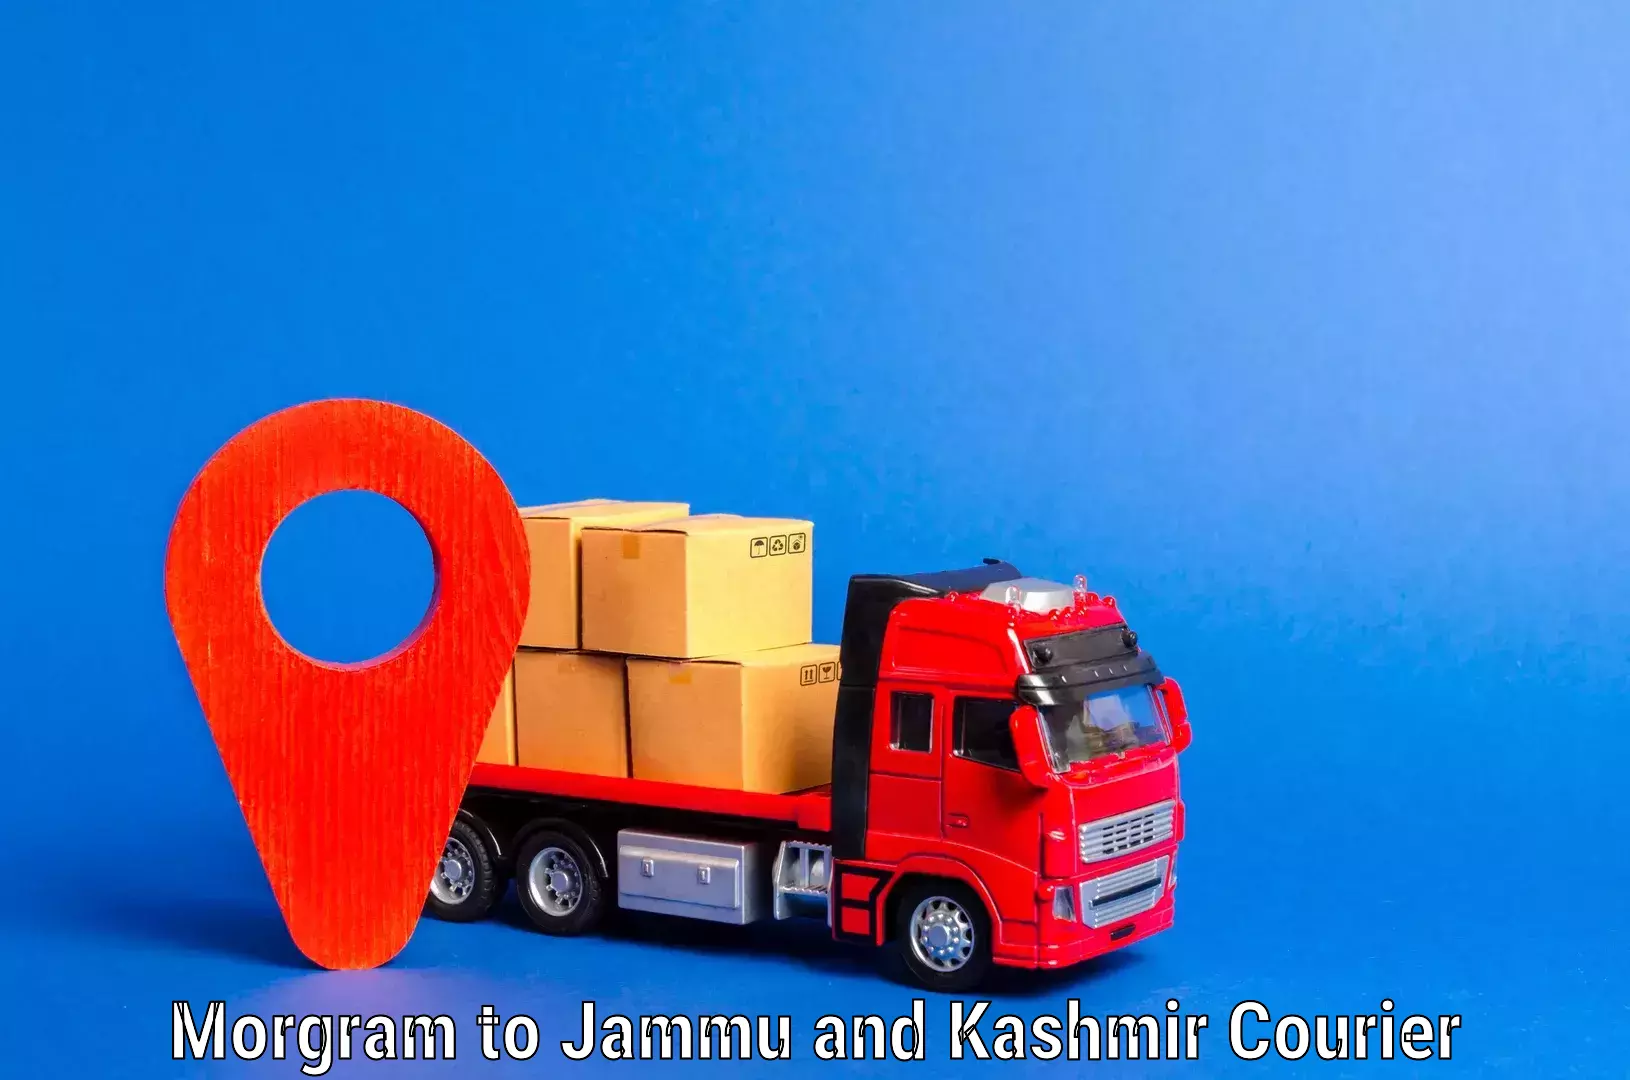 Furniture relocation experts Morgram to Jammu and Kashmir